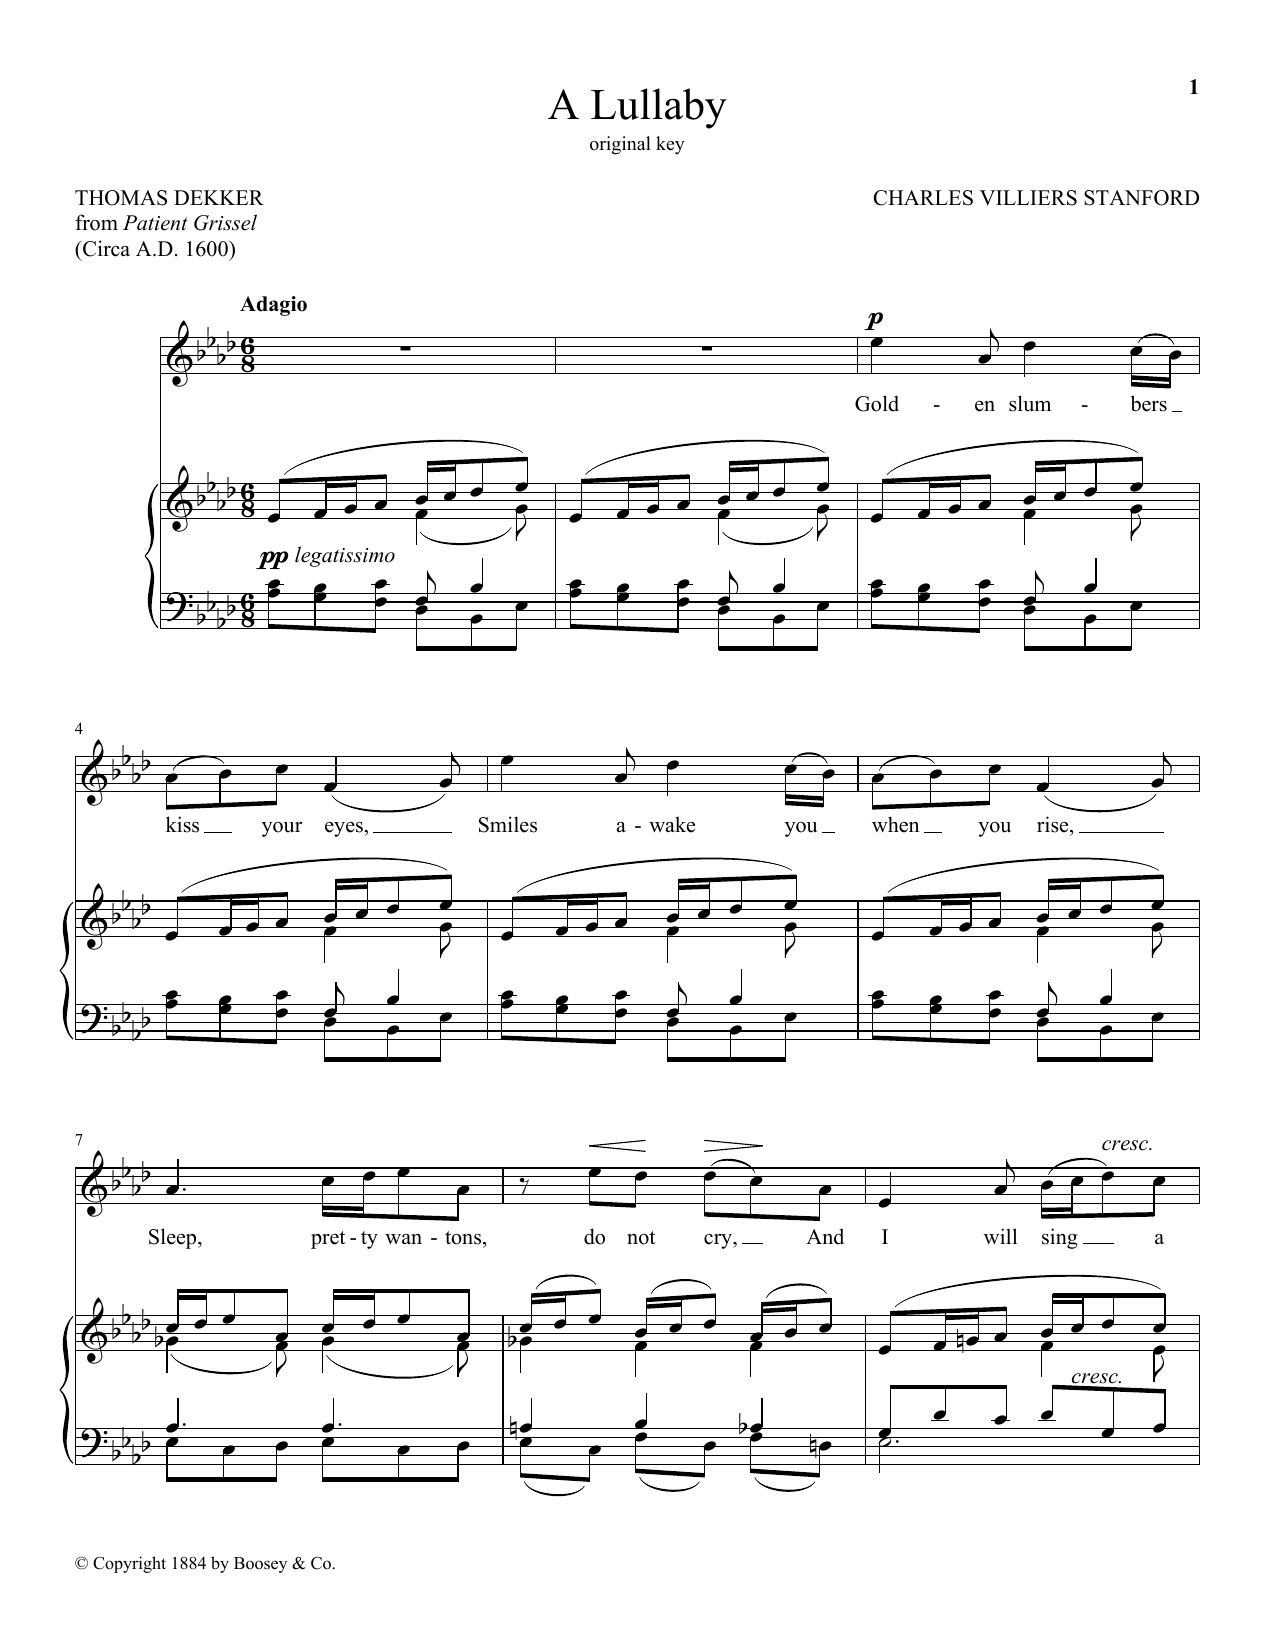 Download Charles Villiers Stanford A Lullaby Sheet Music